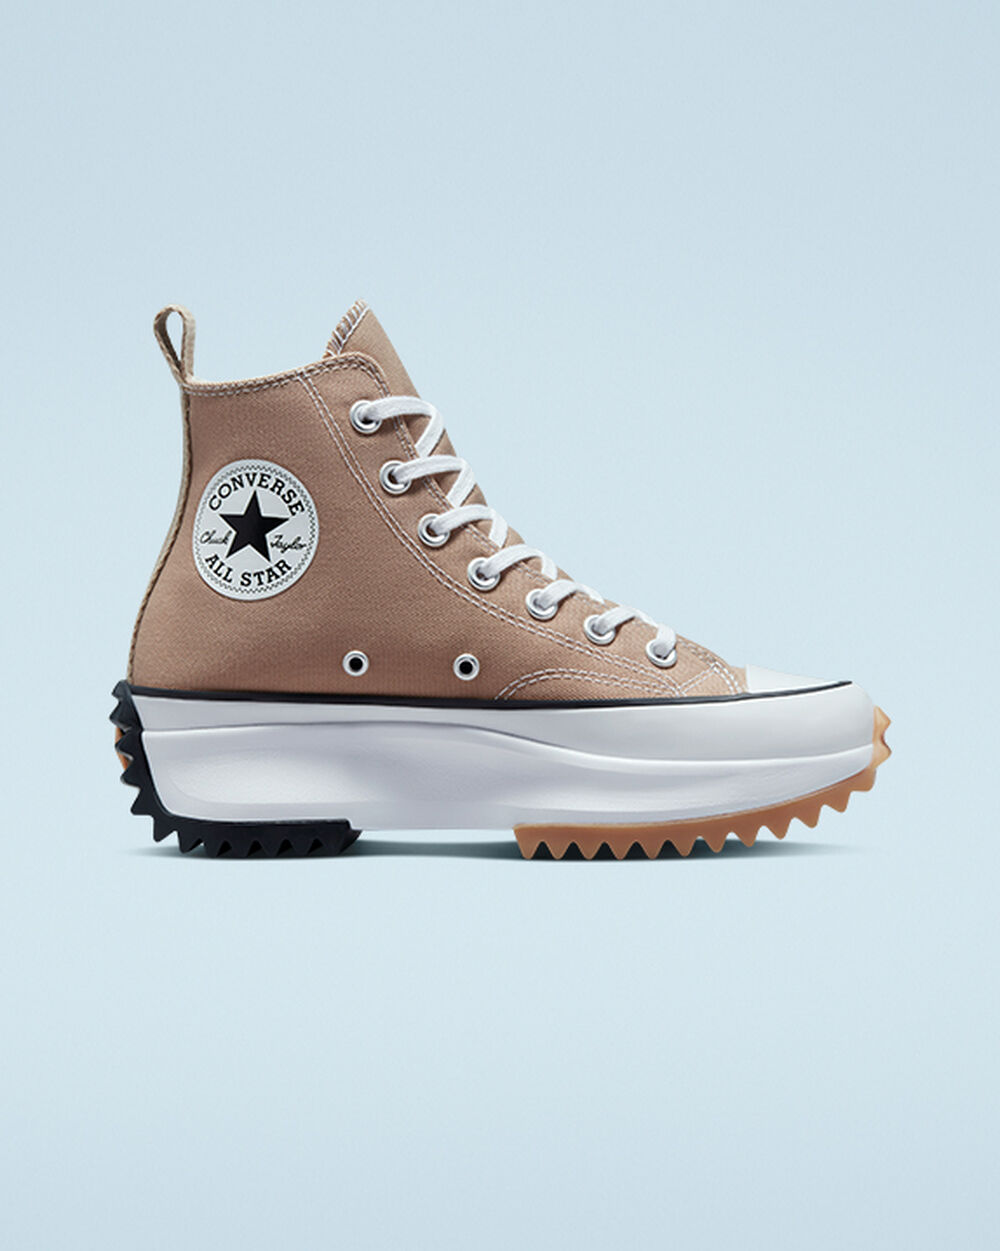 Típico Indomable Contiene Run Star Hike Converse Mujer Outlet Chile | conversechile.com